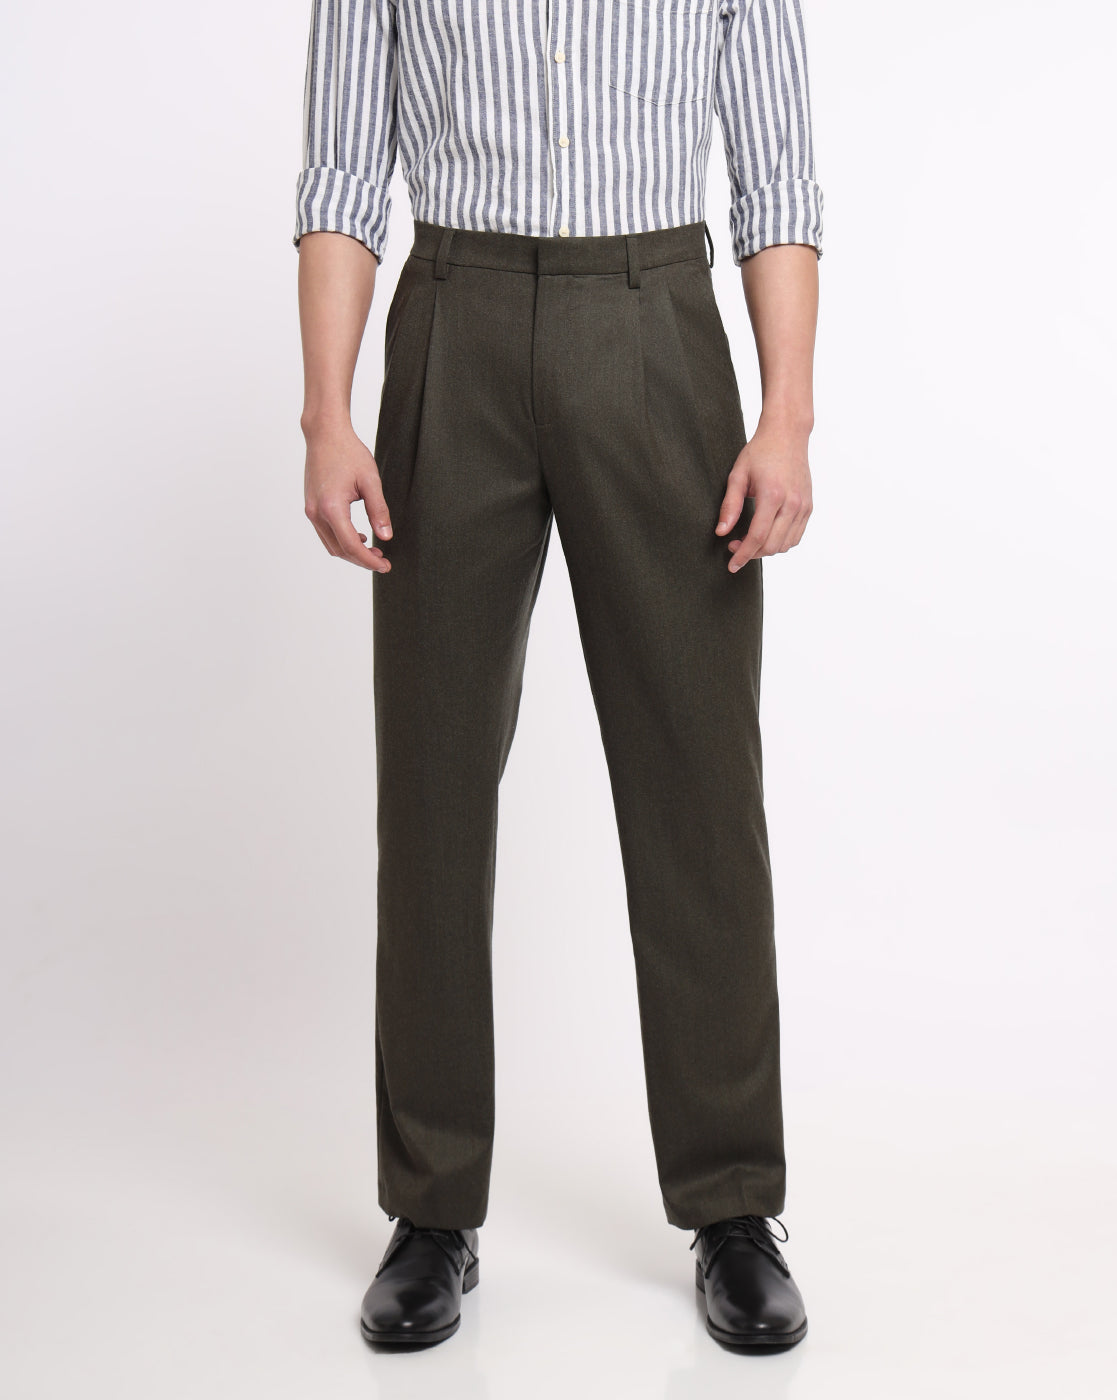 Double Pleated Wool Pants - Olive